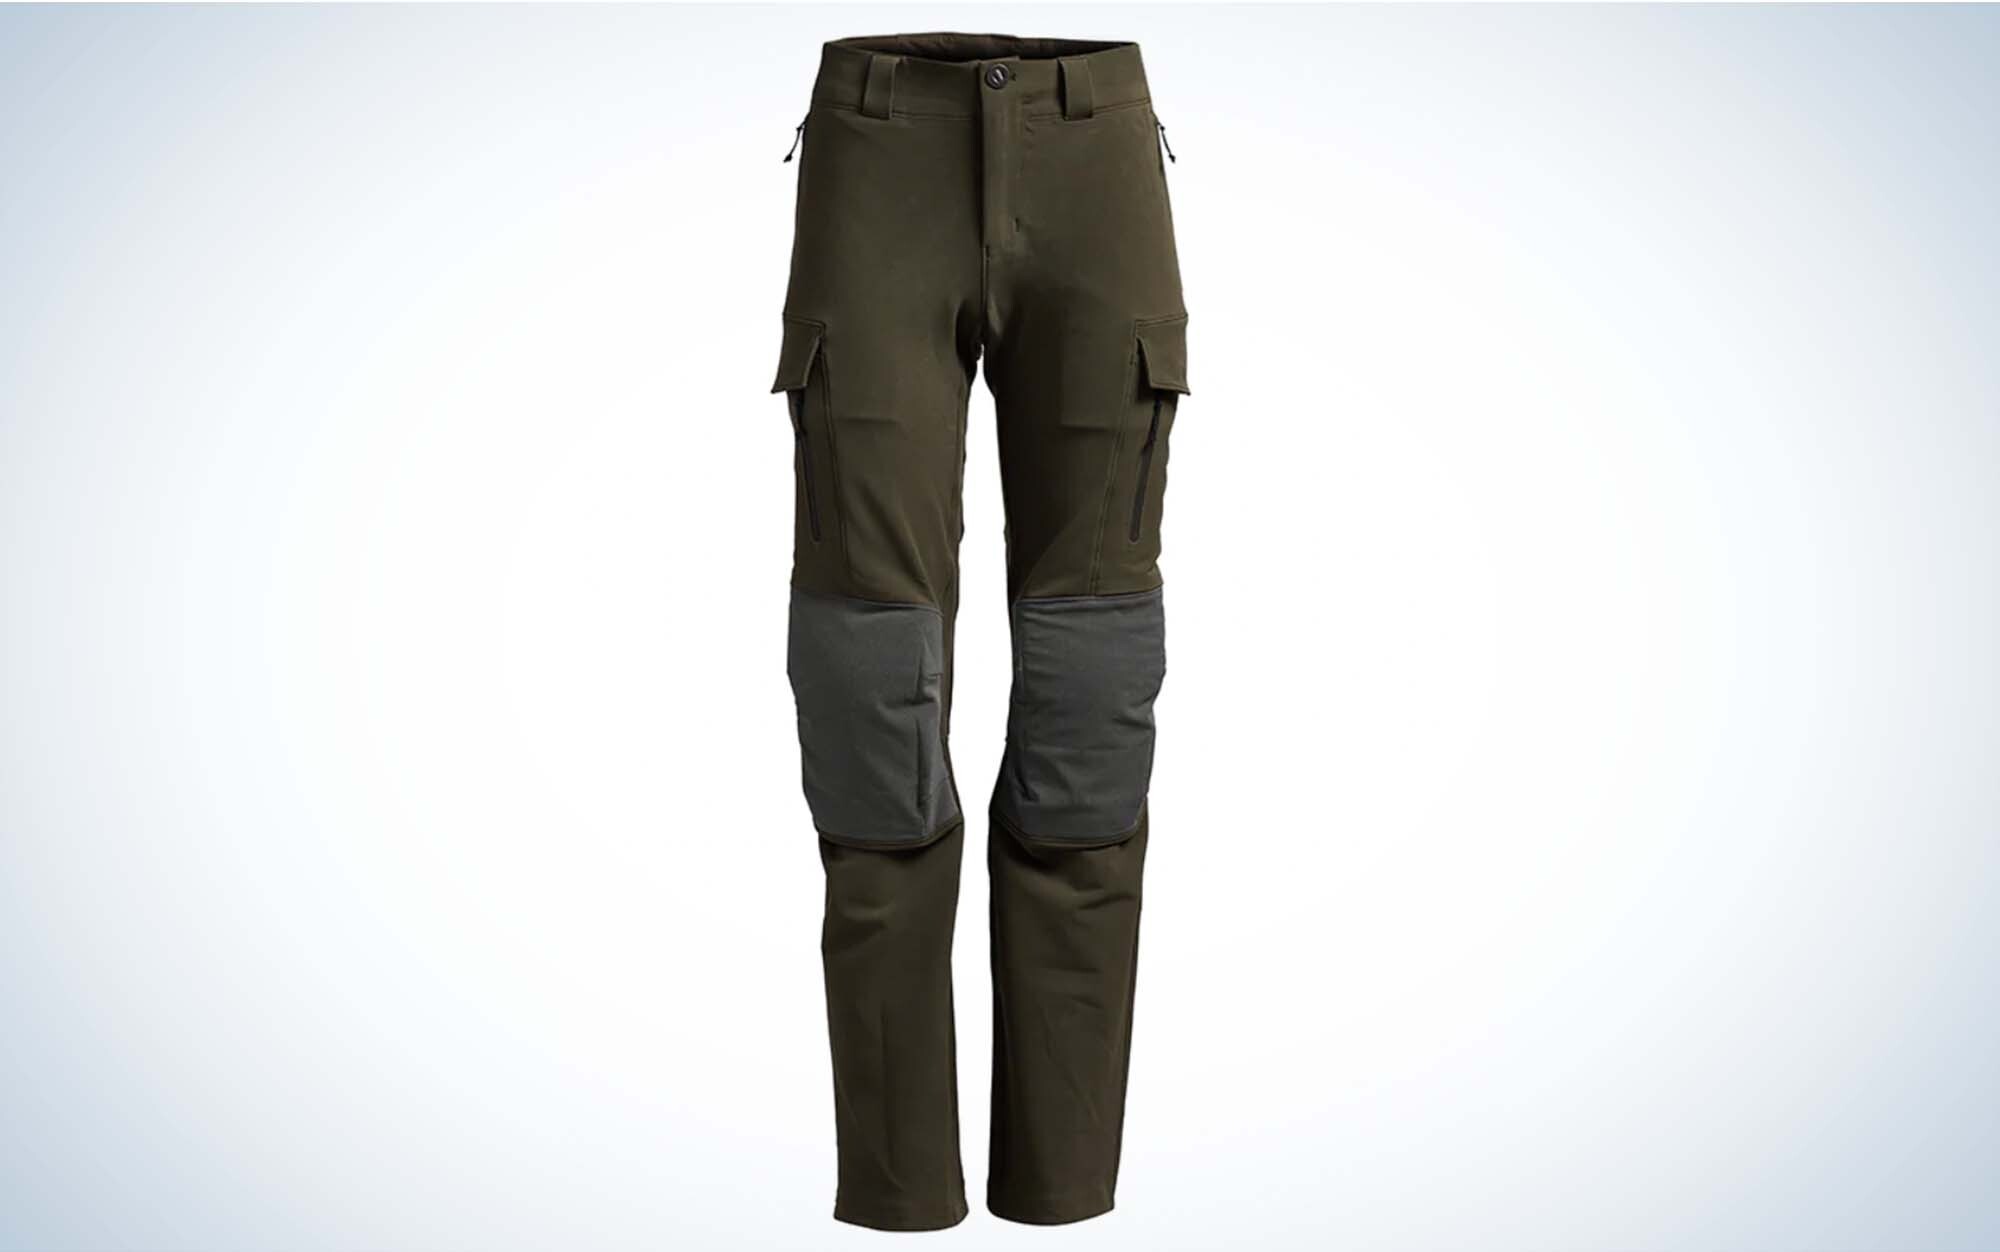 We tested the Timberline pant.